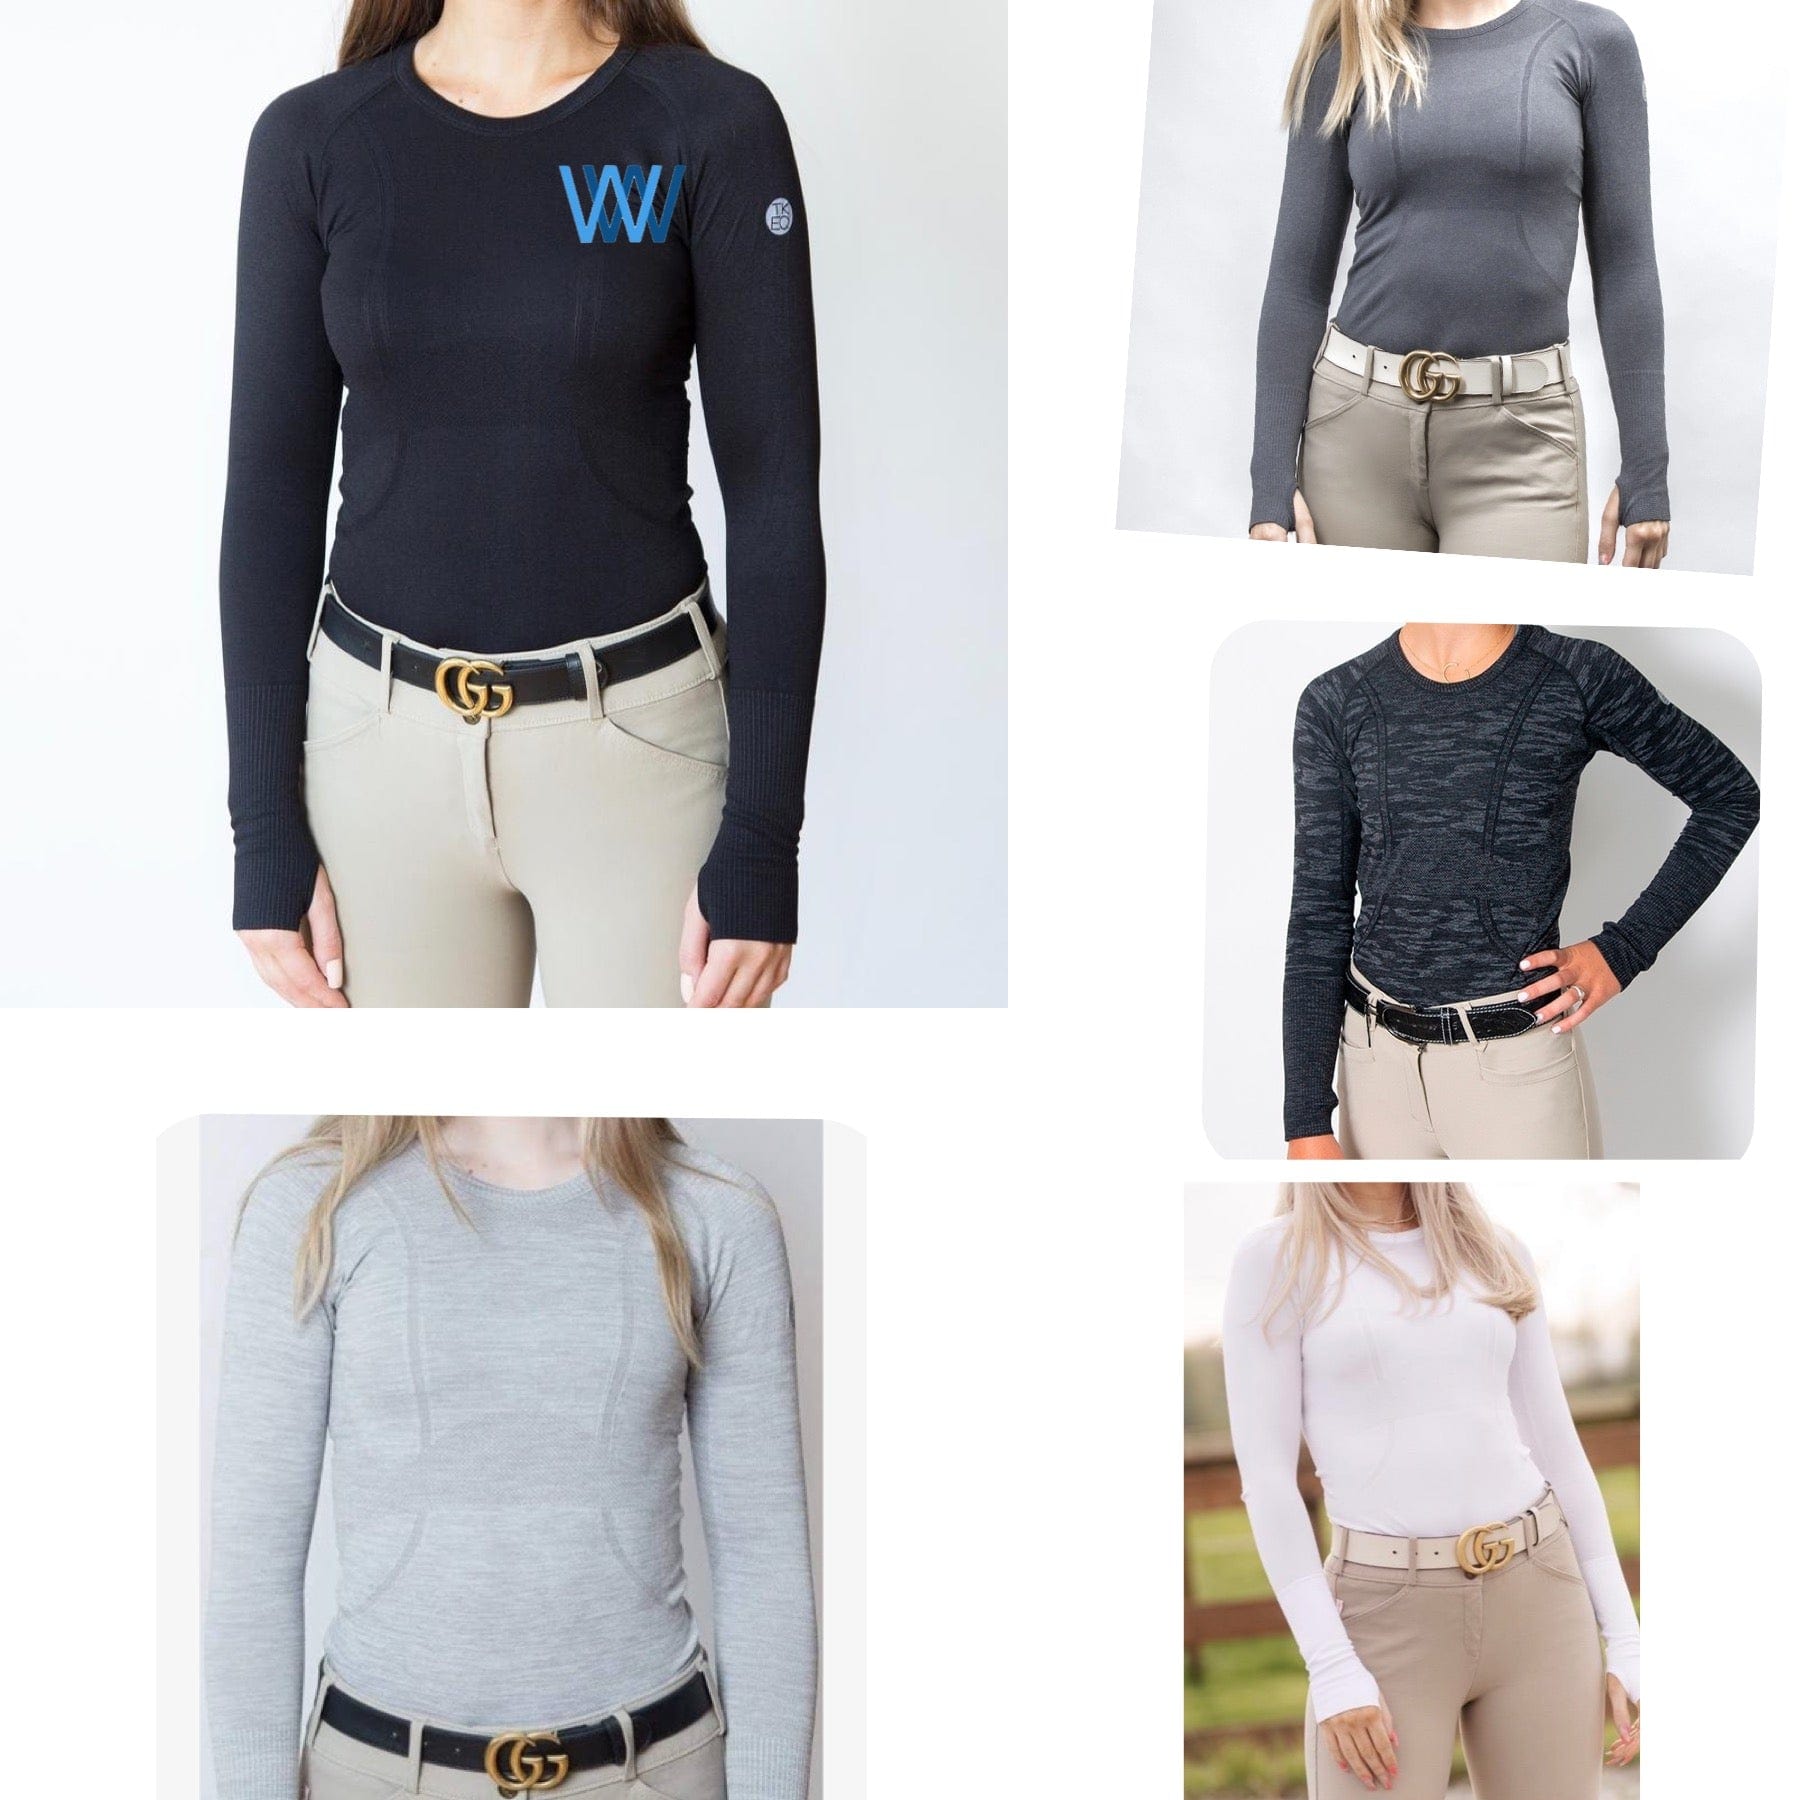 Equestrian Team Apparel Double W Farms Ladies Tech Shirt equestrian team apparel online tack store mobile tack store custom farm apparel custom show stable clothing equestrian lifestyle horse show clothing riding clothes horses equestrian tack store